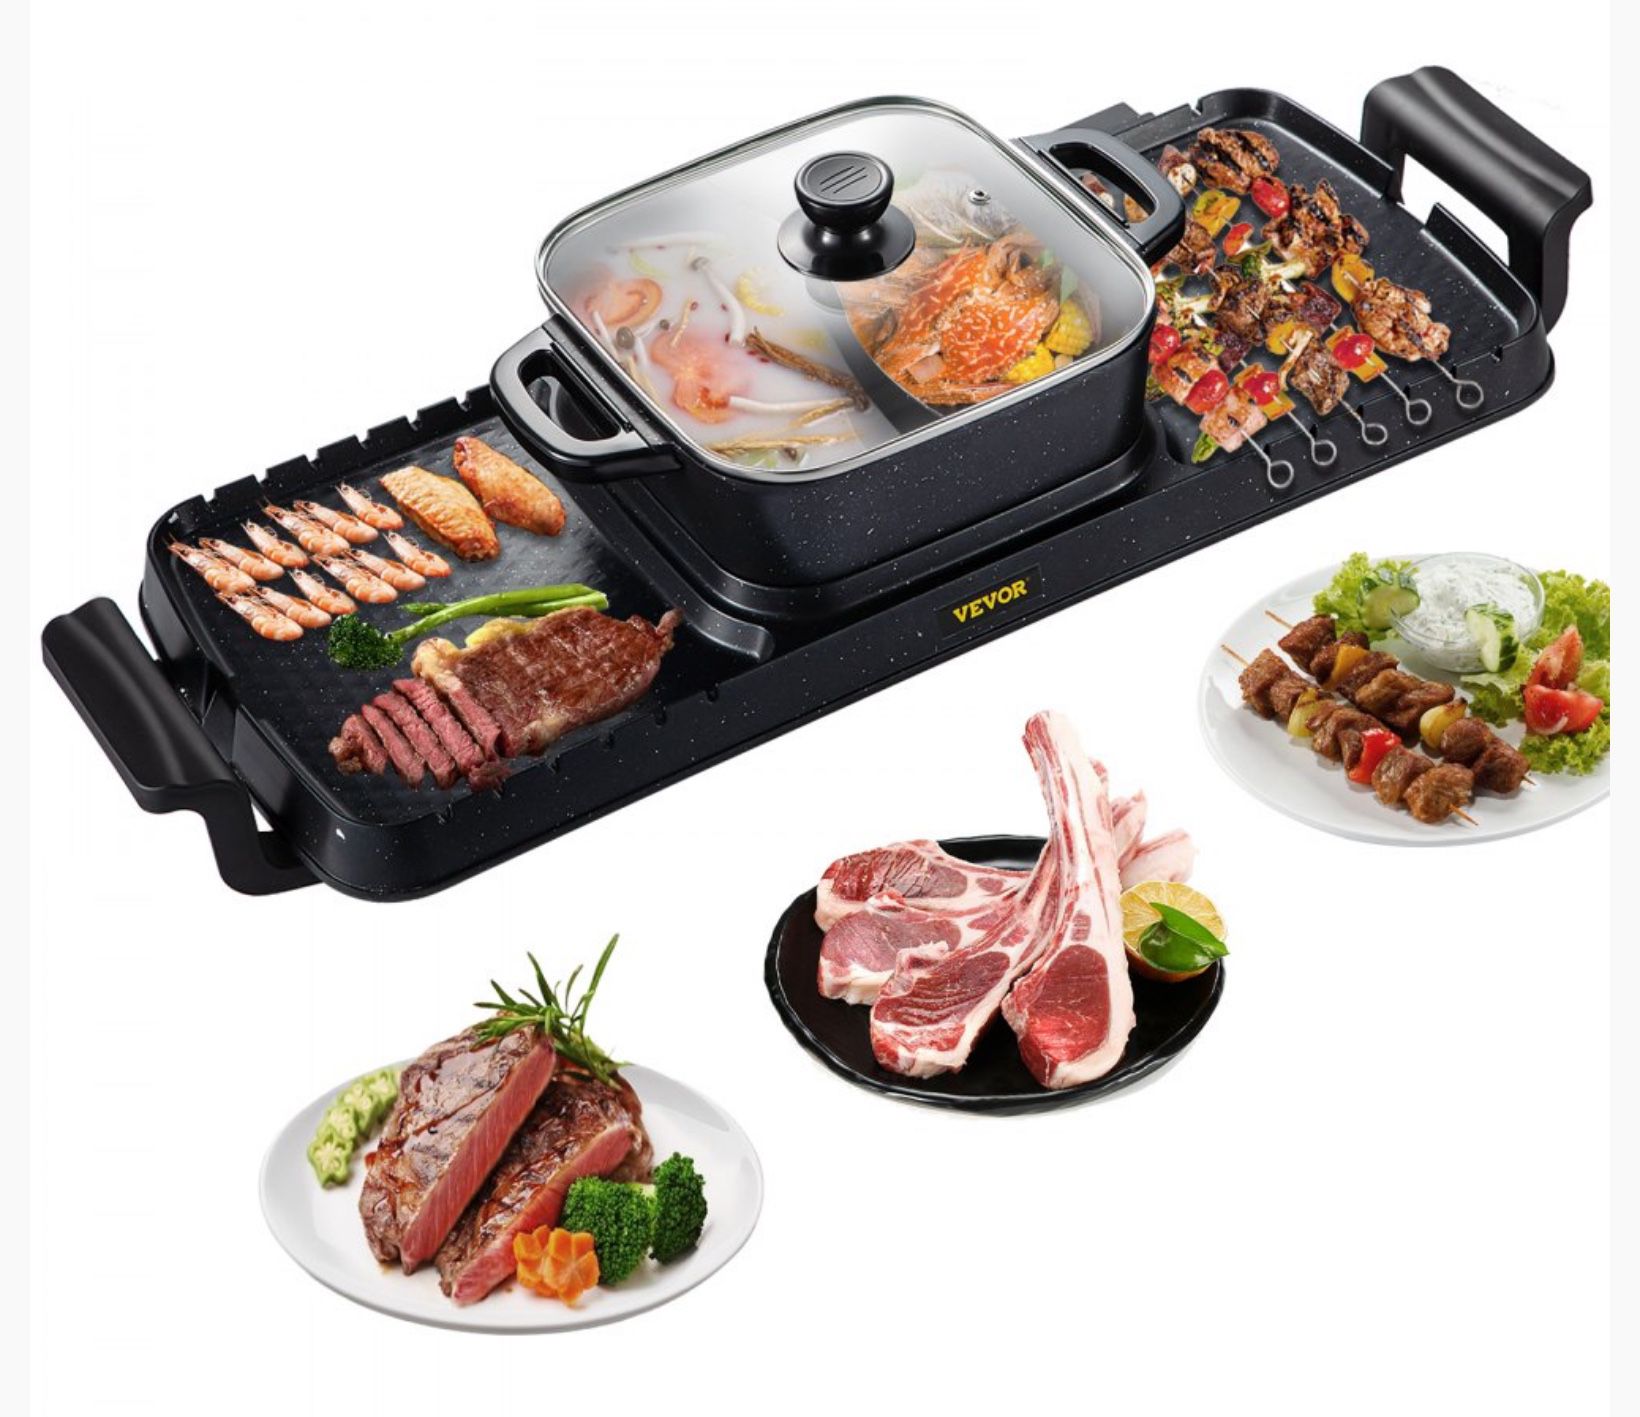 Soup N Grill V2 Hotpot Grill Combo, Indoor Korean BBQ, Shabu Shabu Electric Hot Pot with Divider, Portable with Free Strainer Scoops, Extra Long Chops